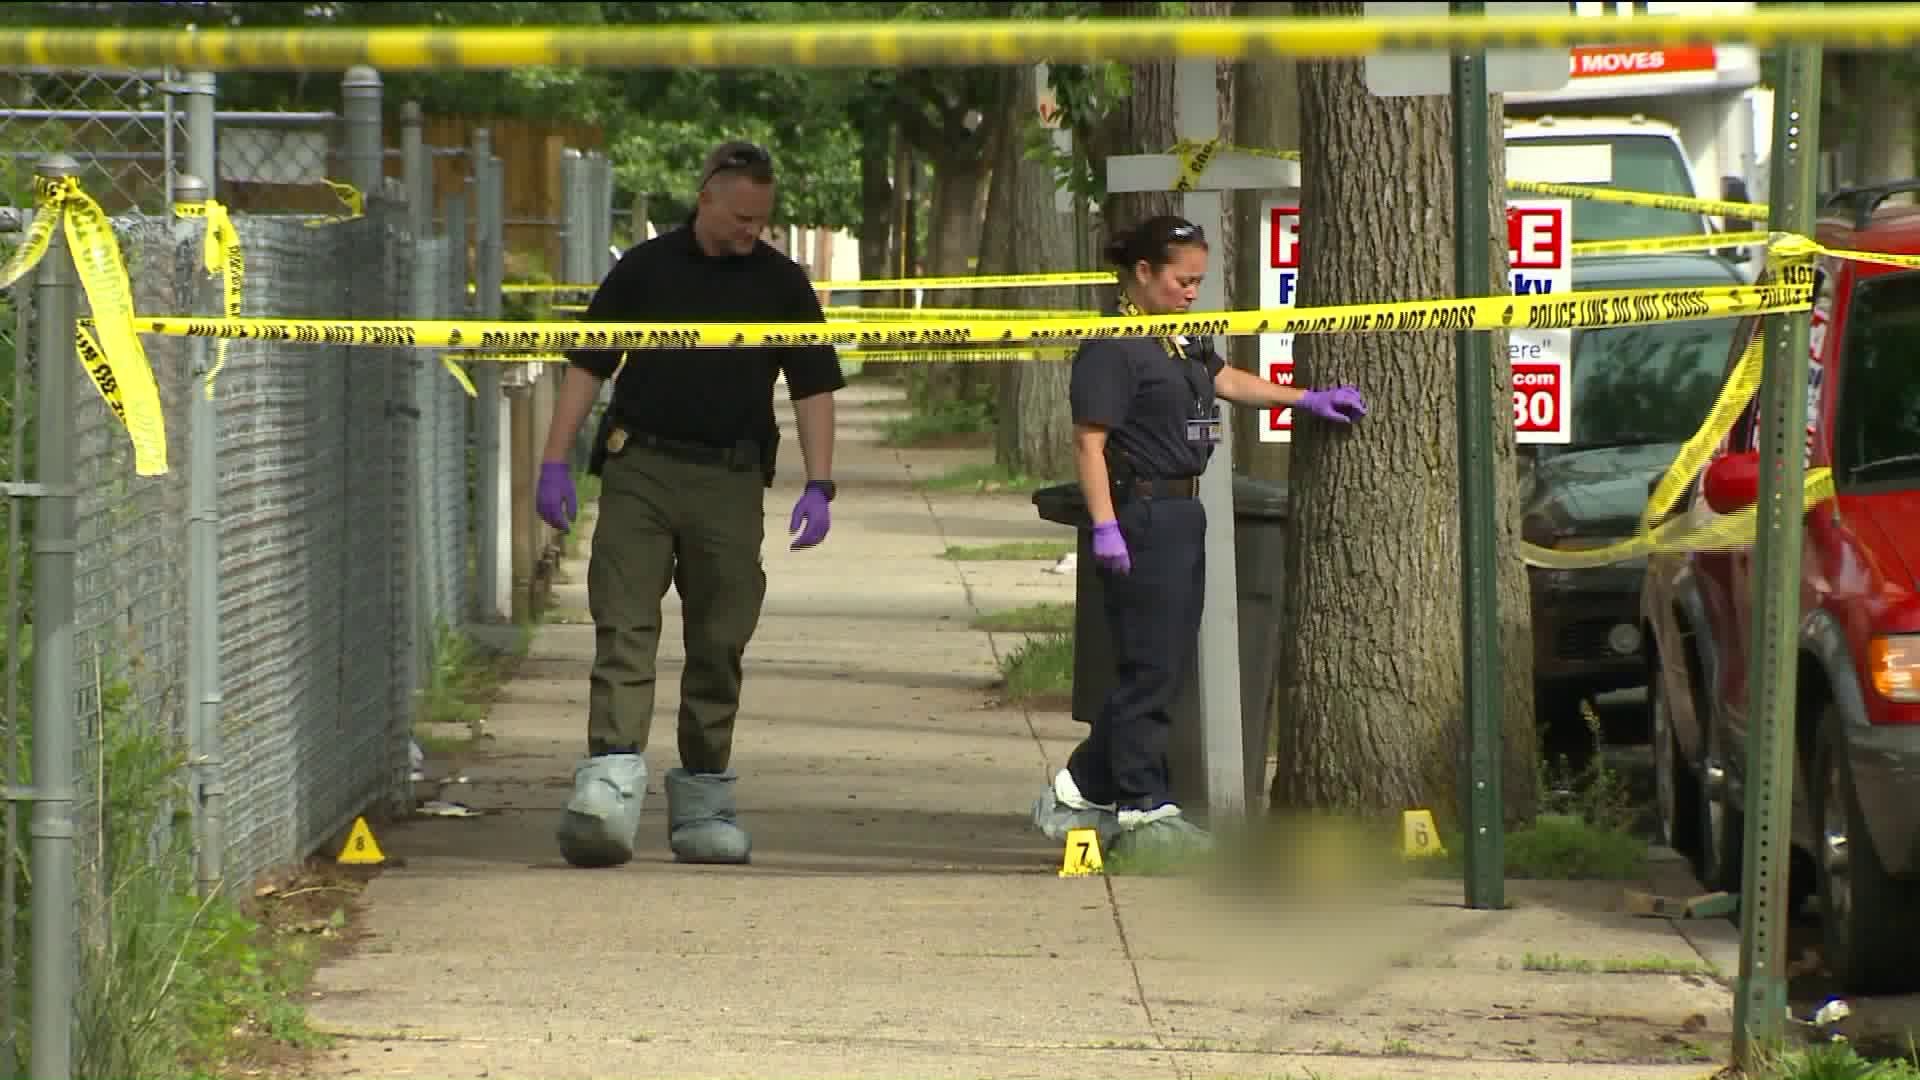 1 person dead following double shooting in New Haven